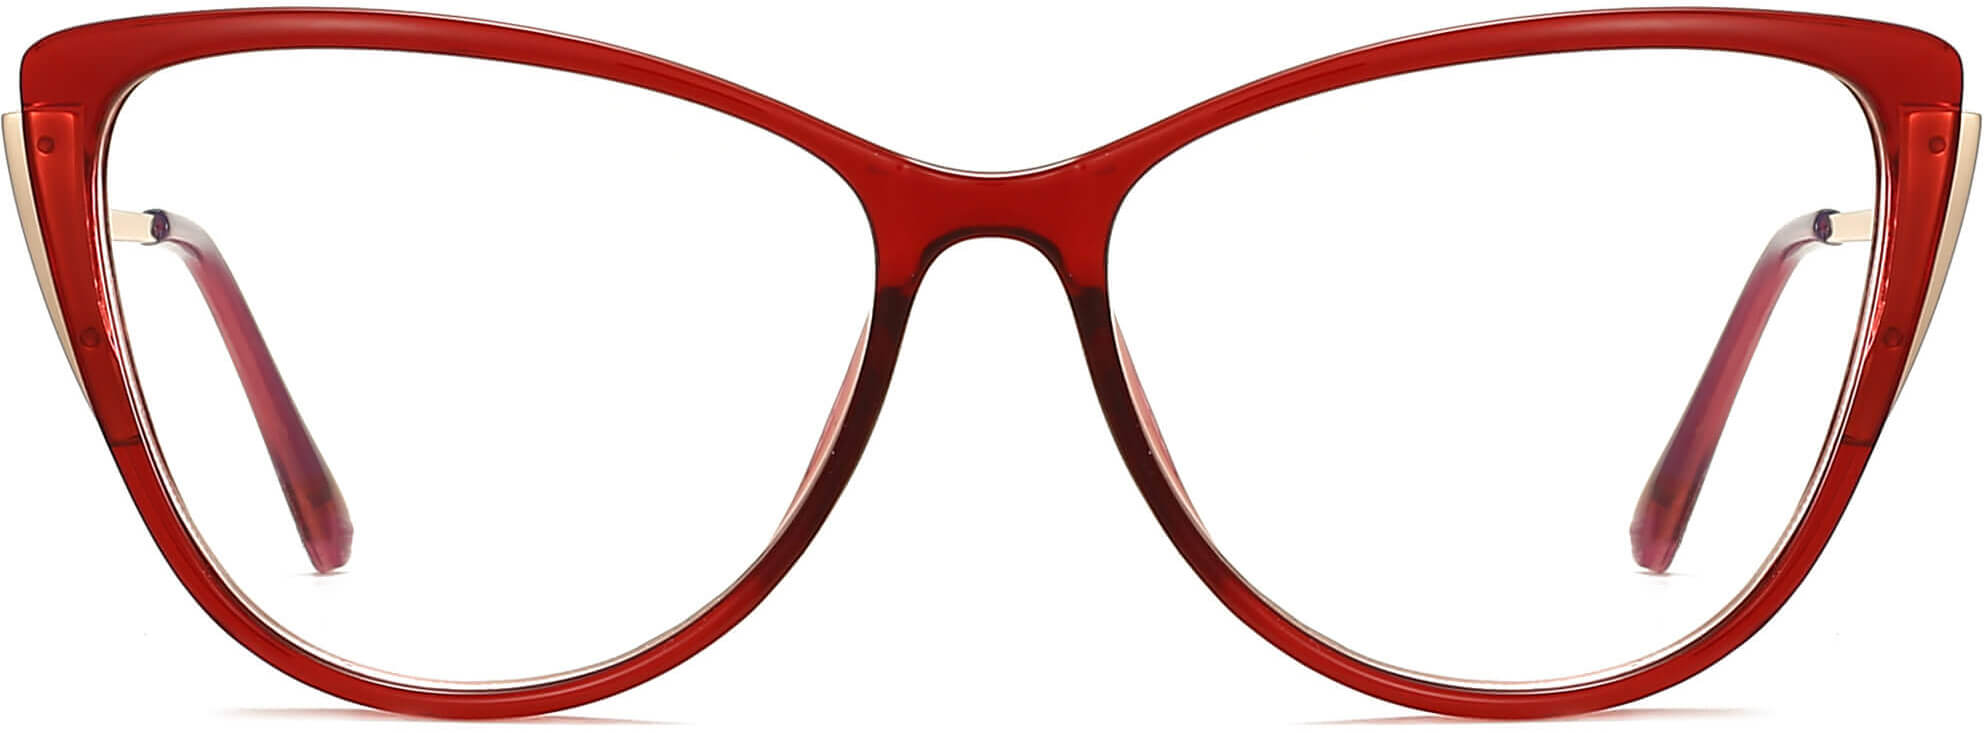 Jenny Cateye Red Eyeglasses from ANRRI, front view